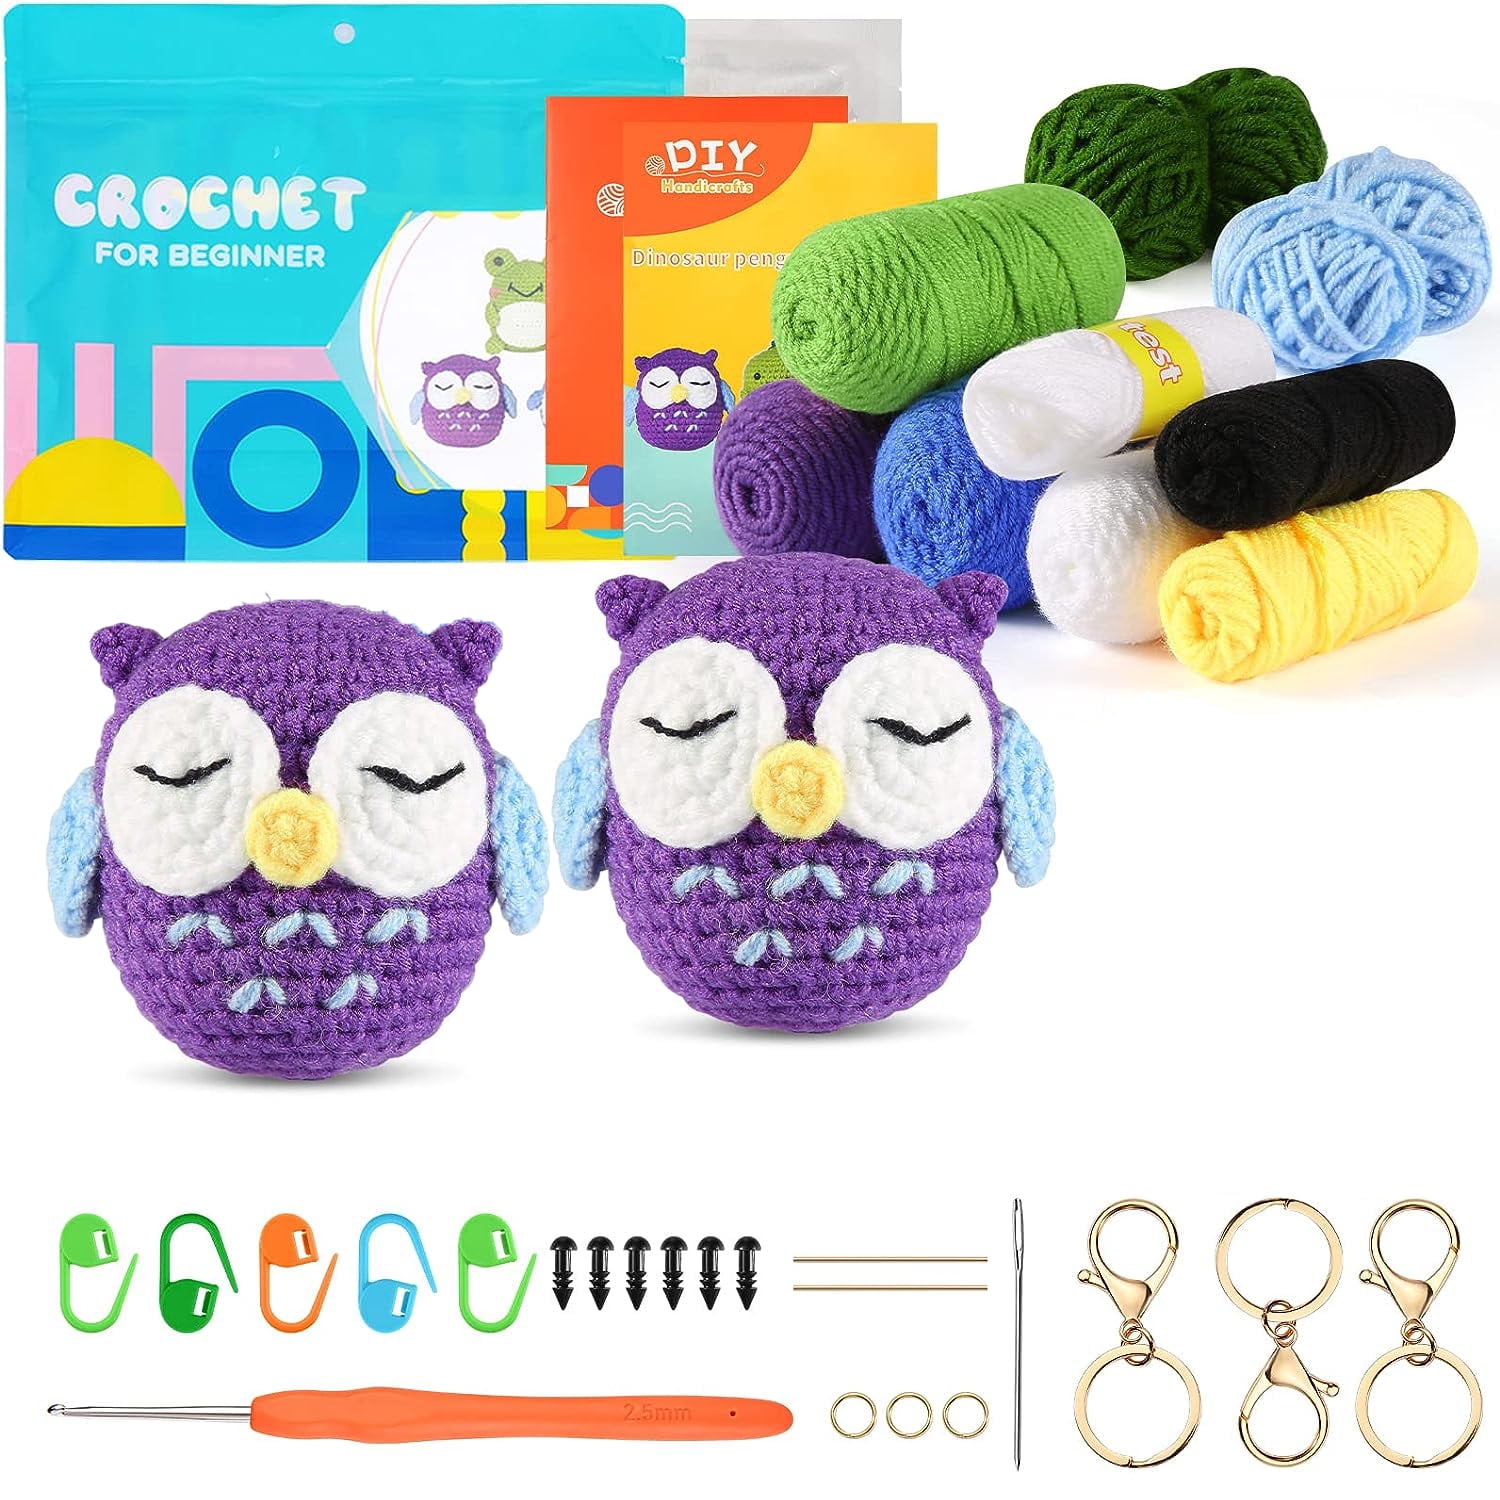 GCVOPTON Crochet Kit for Beginners, Easy Crotcheting Starter Kit with Step-by-Step Video Tutorials,Knitting Kits for Adult & Kids, Christmas Tree